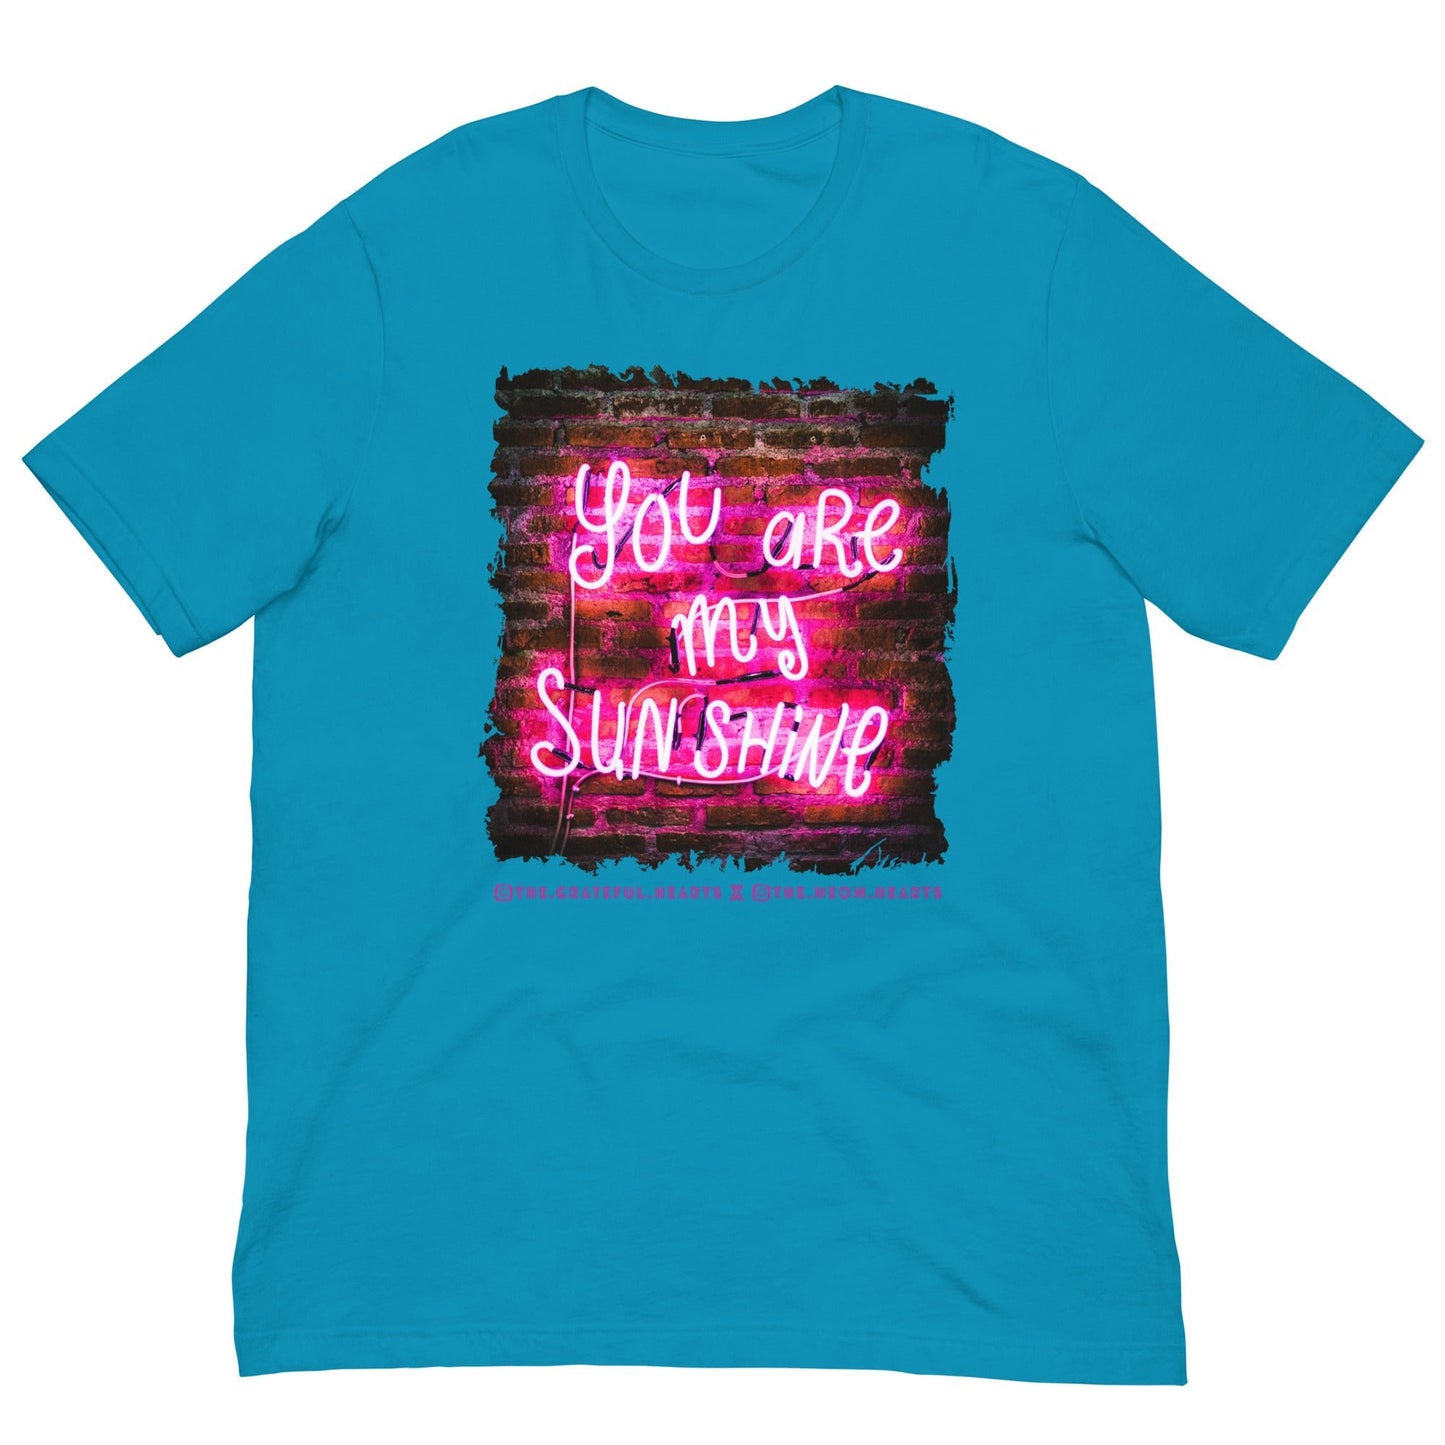 You Are My Sunshine ❤️ - Unisex Crew Neck t-shirt (Available in Various Colors 💖💙💜) - The Grateful Hearts